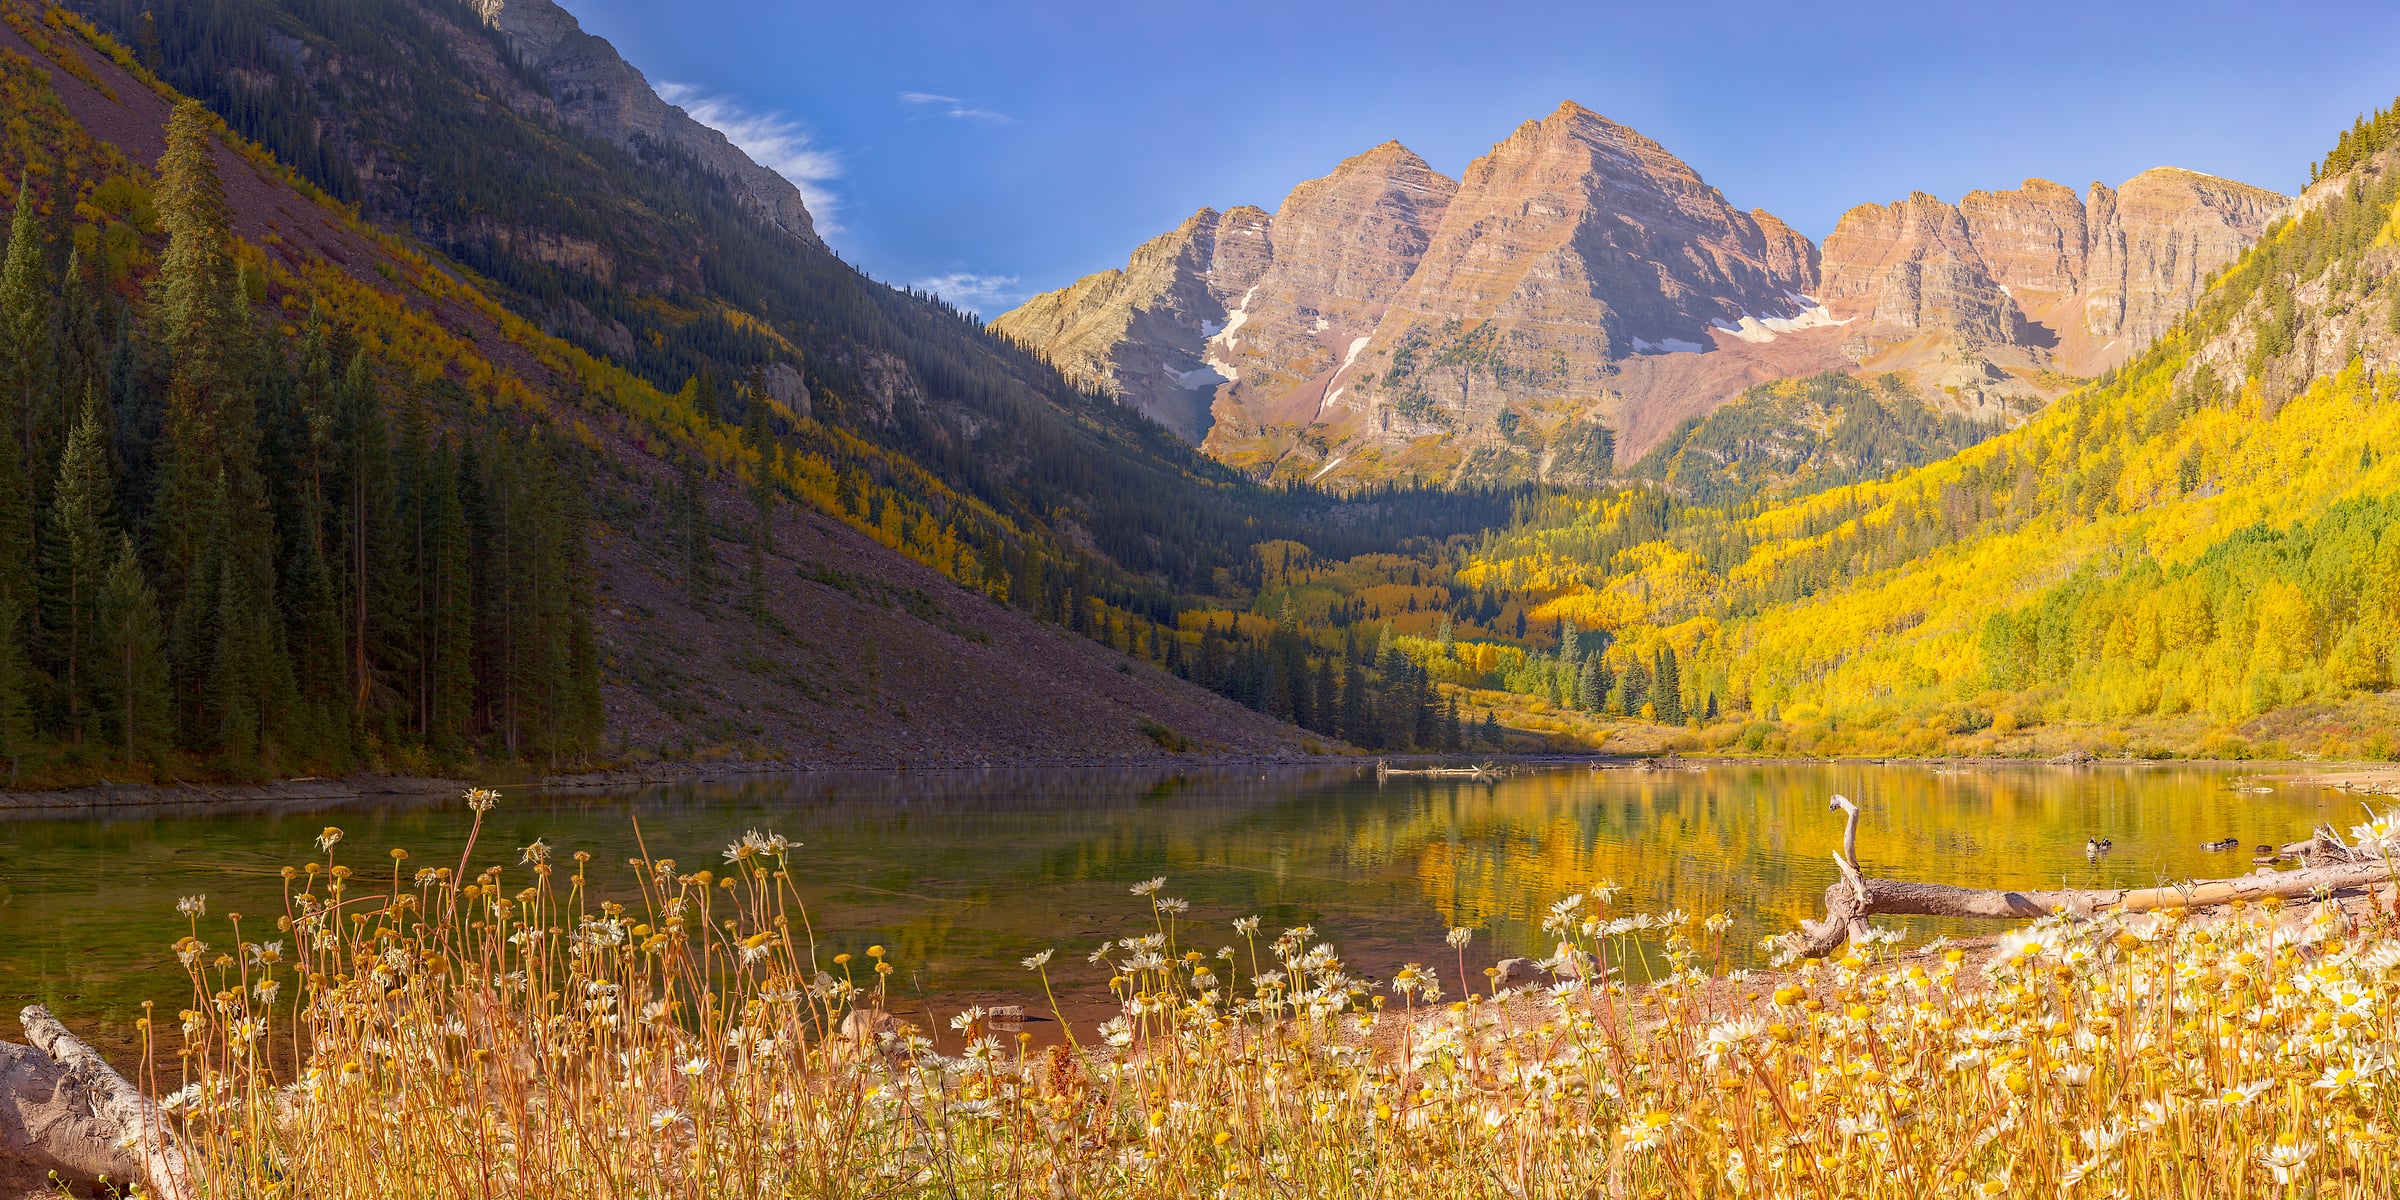 2,691 megapixels! A very high resolution, large-format VAST photo print of Maroon Lake with a mountain in the background and daises in the foreground; gigapixel landscape photograph created by John Freeman in Maroon Lake, Aspen, Colorado.